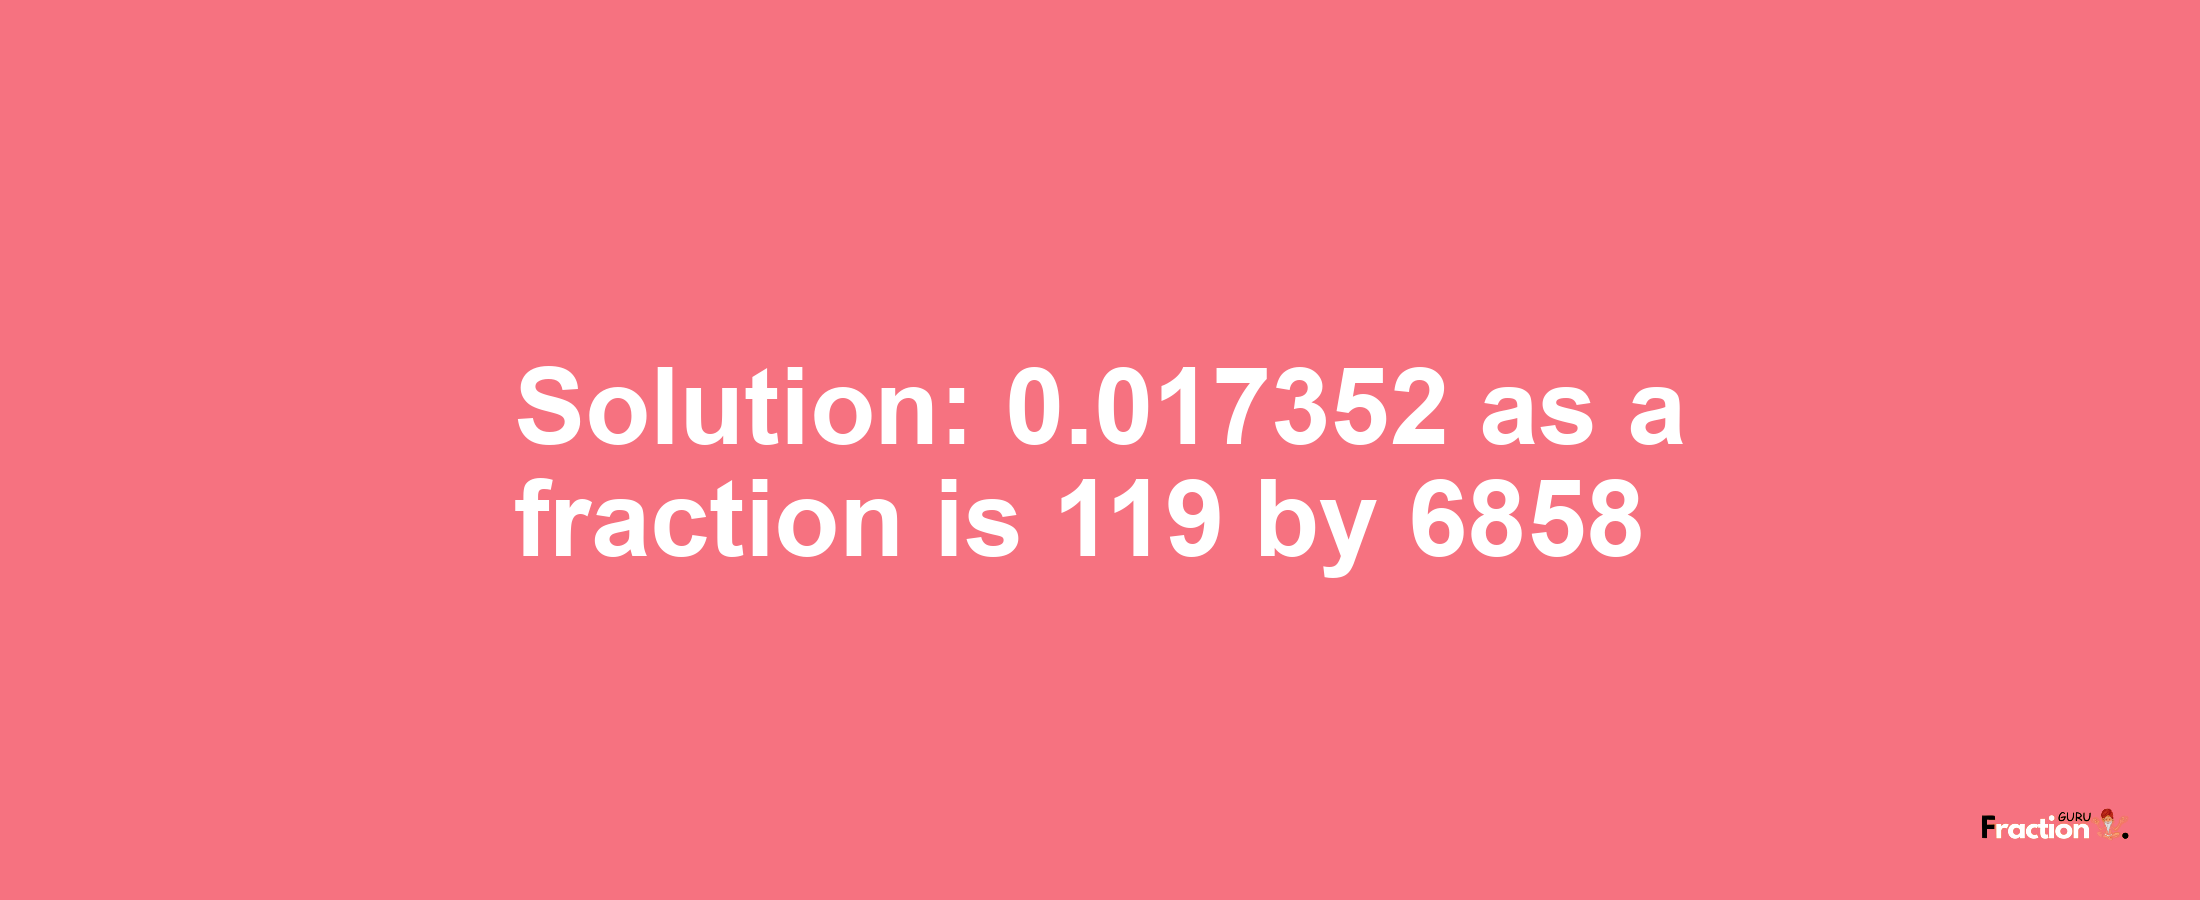 Solution:0.017352 as a fraction is 119/6858